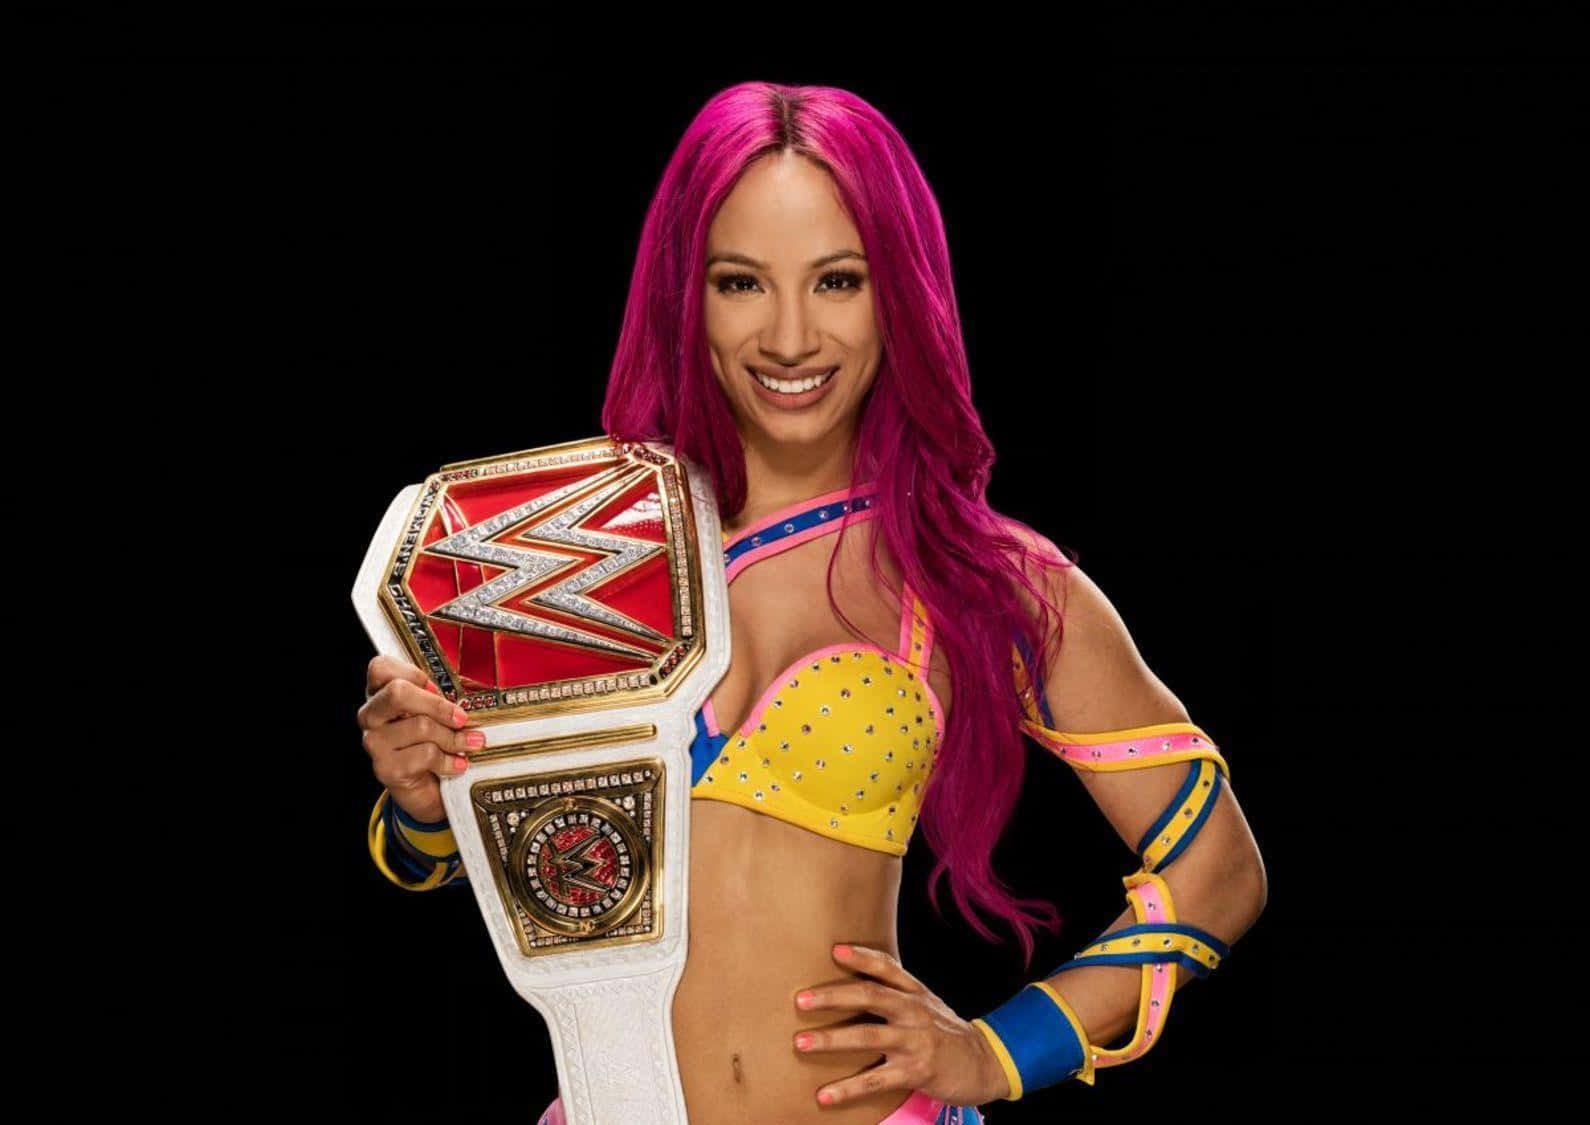 A Woman With Pink Hair Holding A Wwe Championship